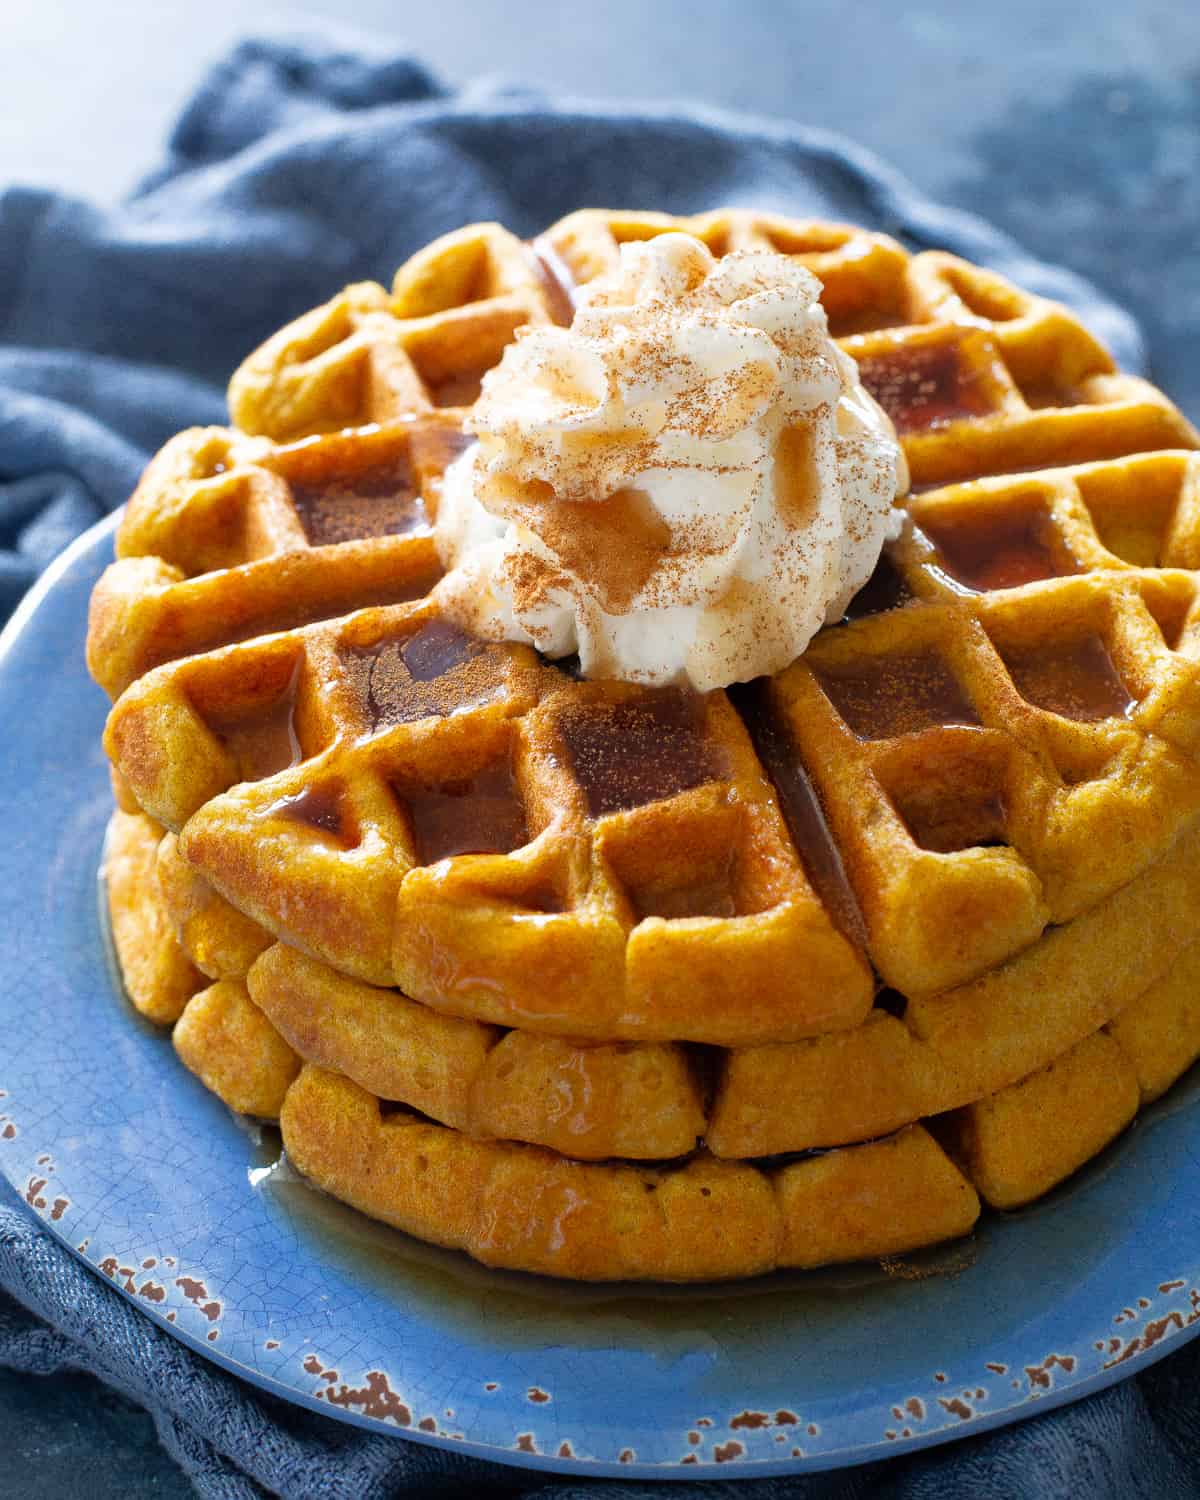 pumpkin waffles with whipped cream on a blue plate